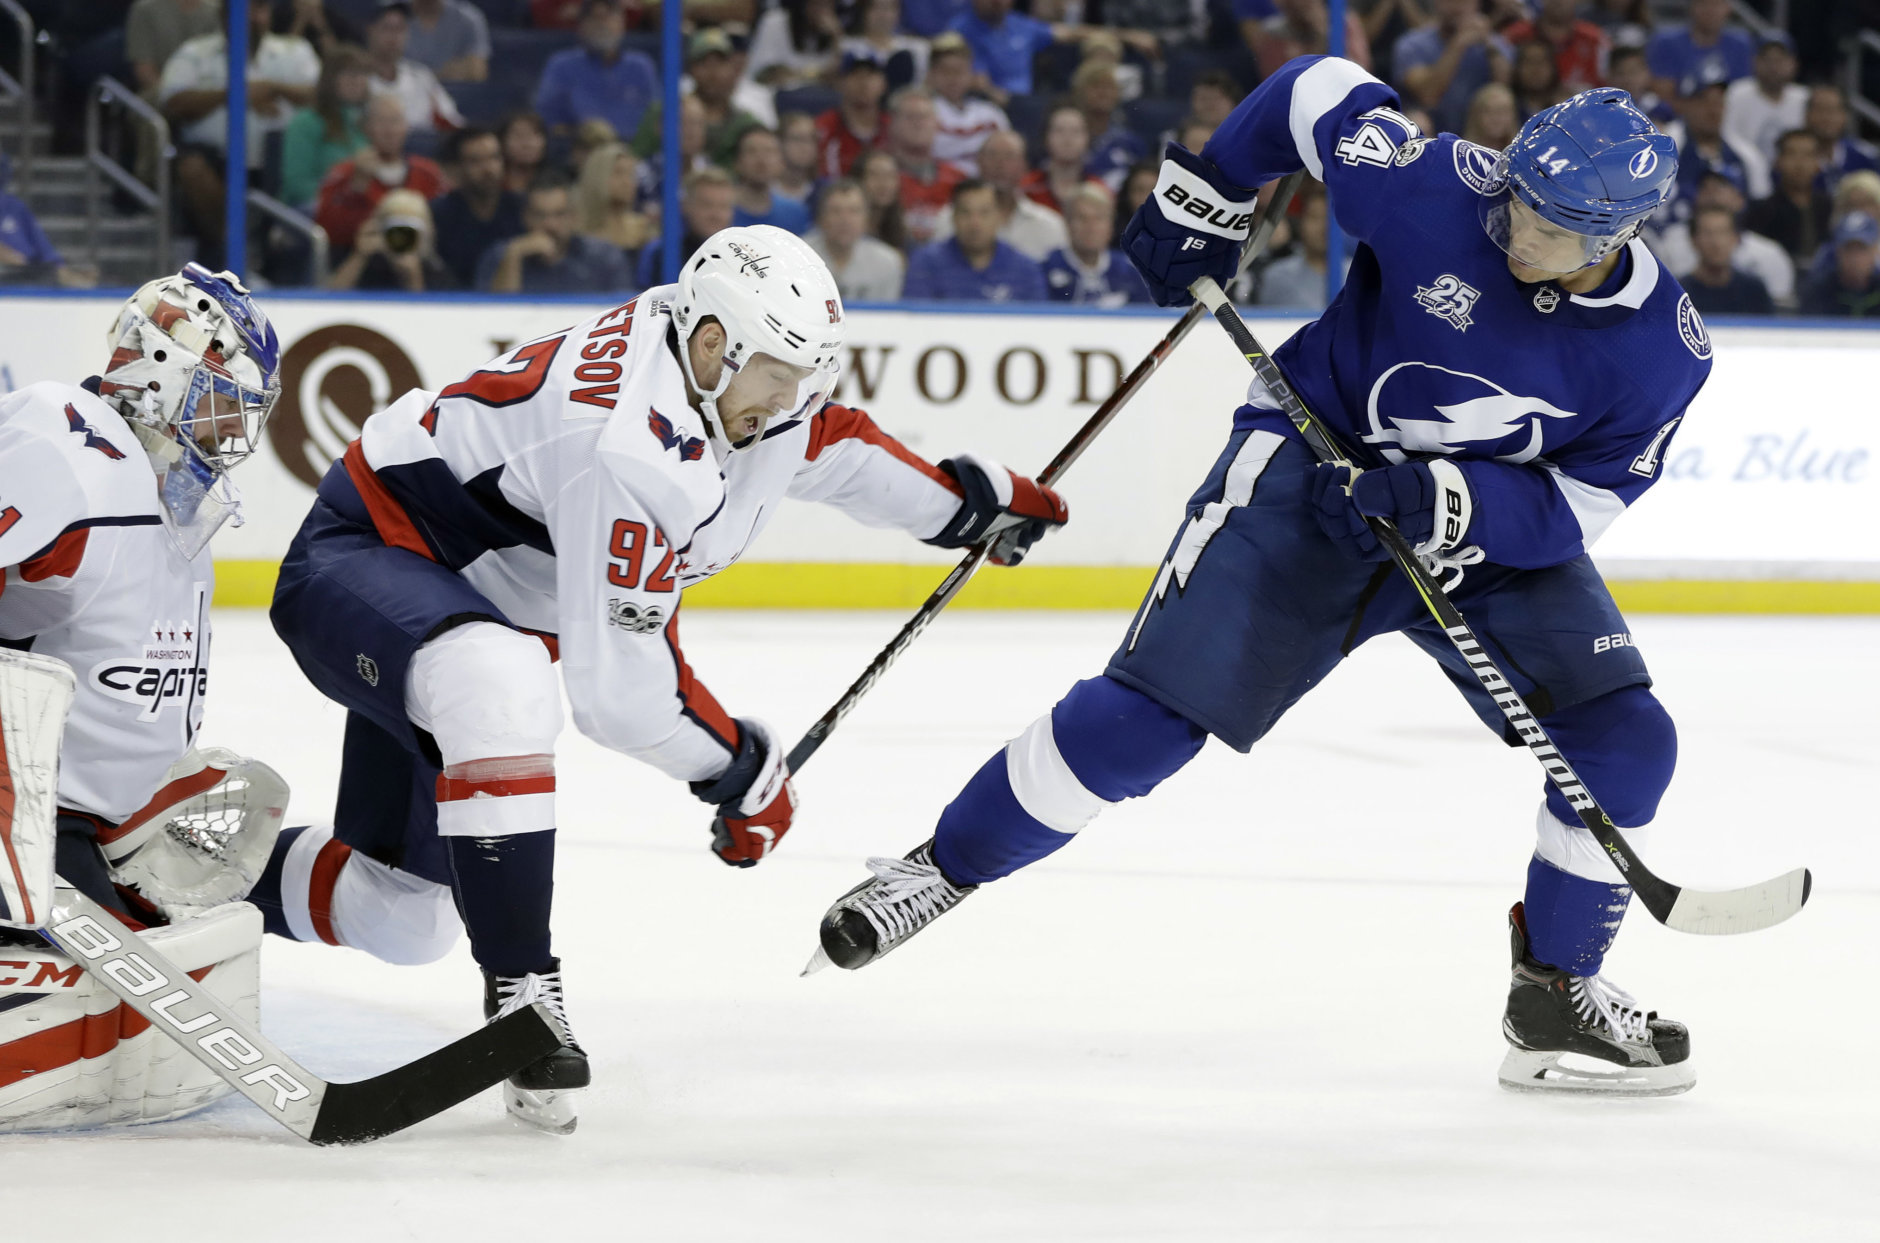 Tampa Bay Lightning dress code policy could curb Penguins jerseys